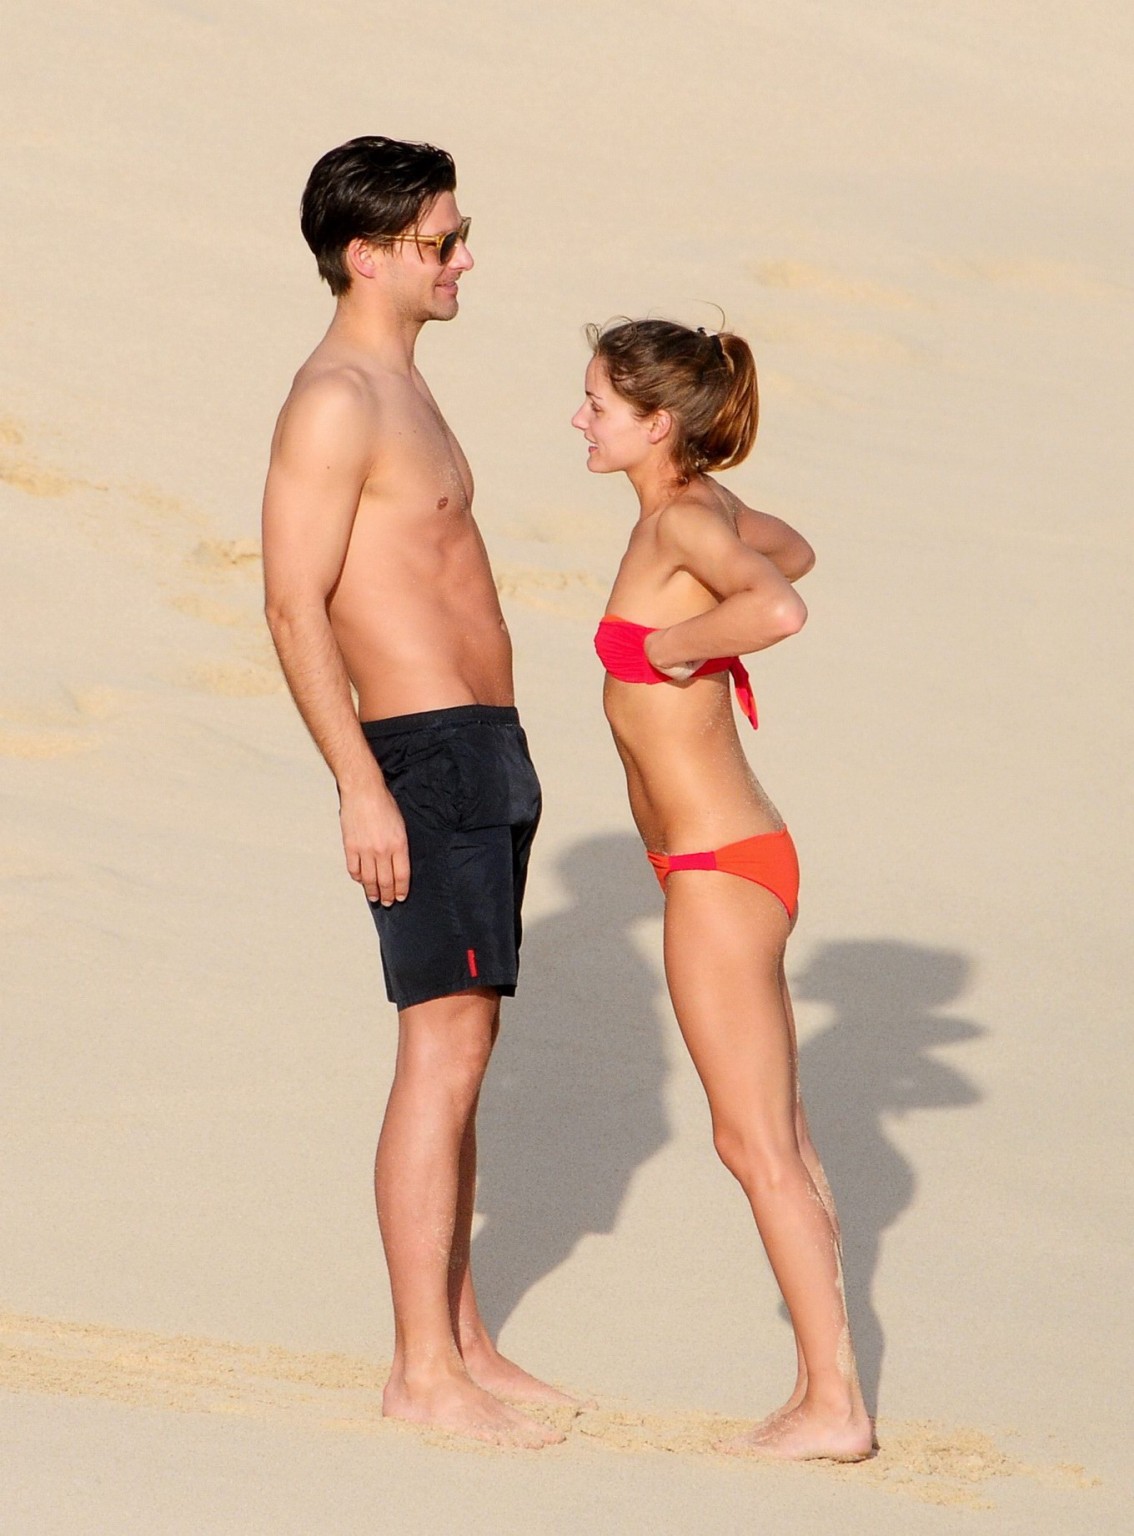 Olivia Palermo in bikini making out with her boyfriend on a beach in St. Barts #75277996